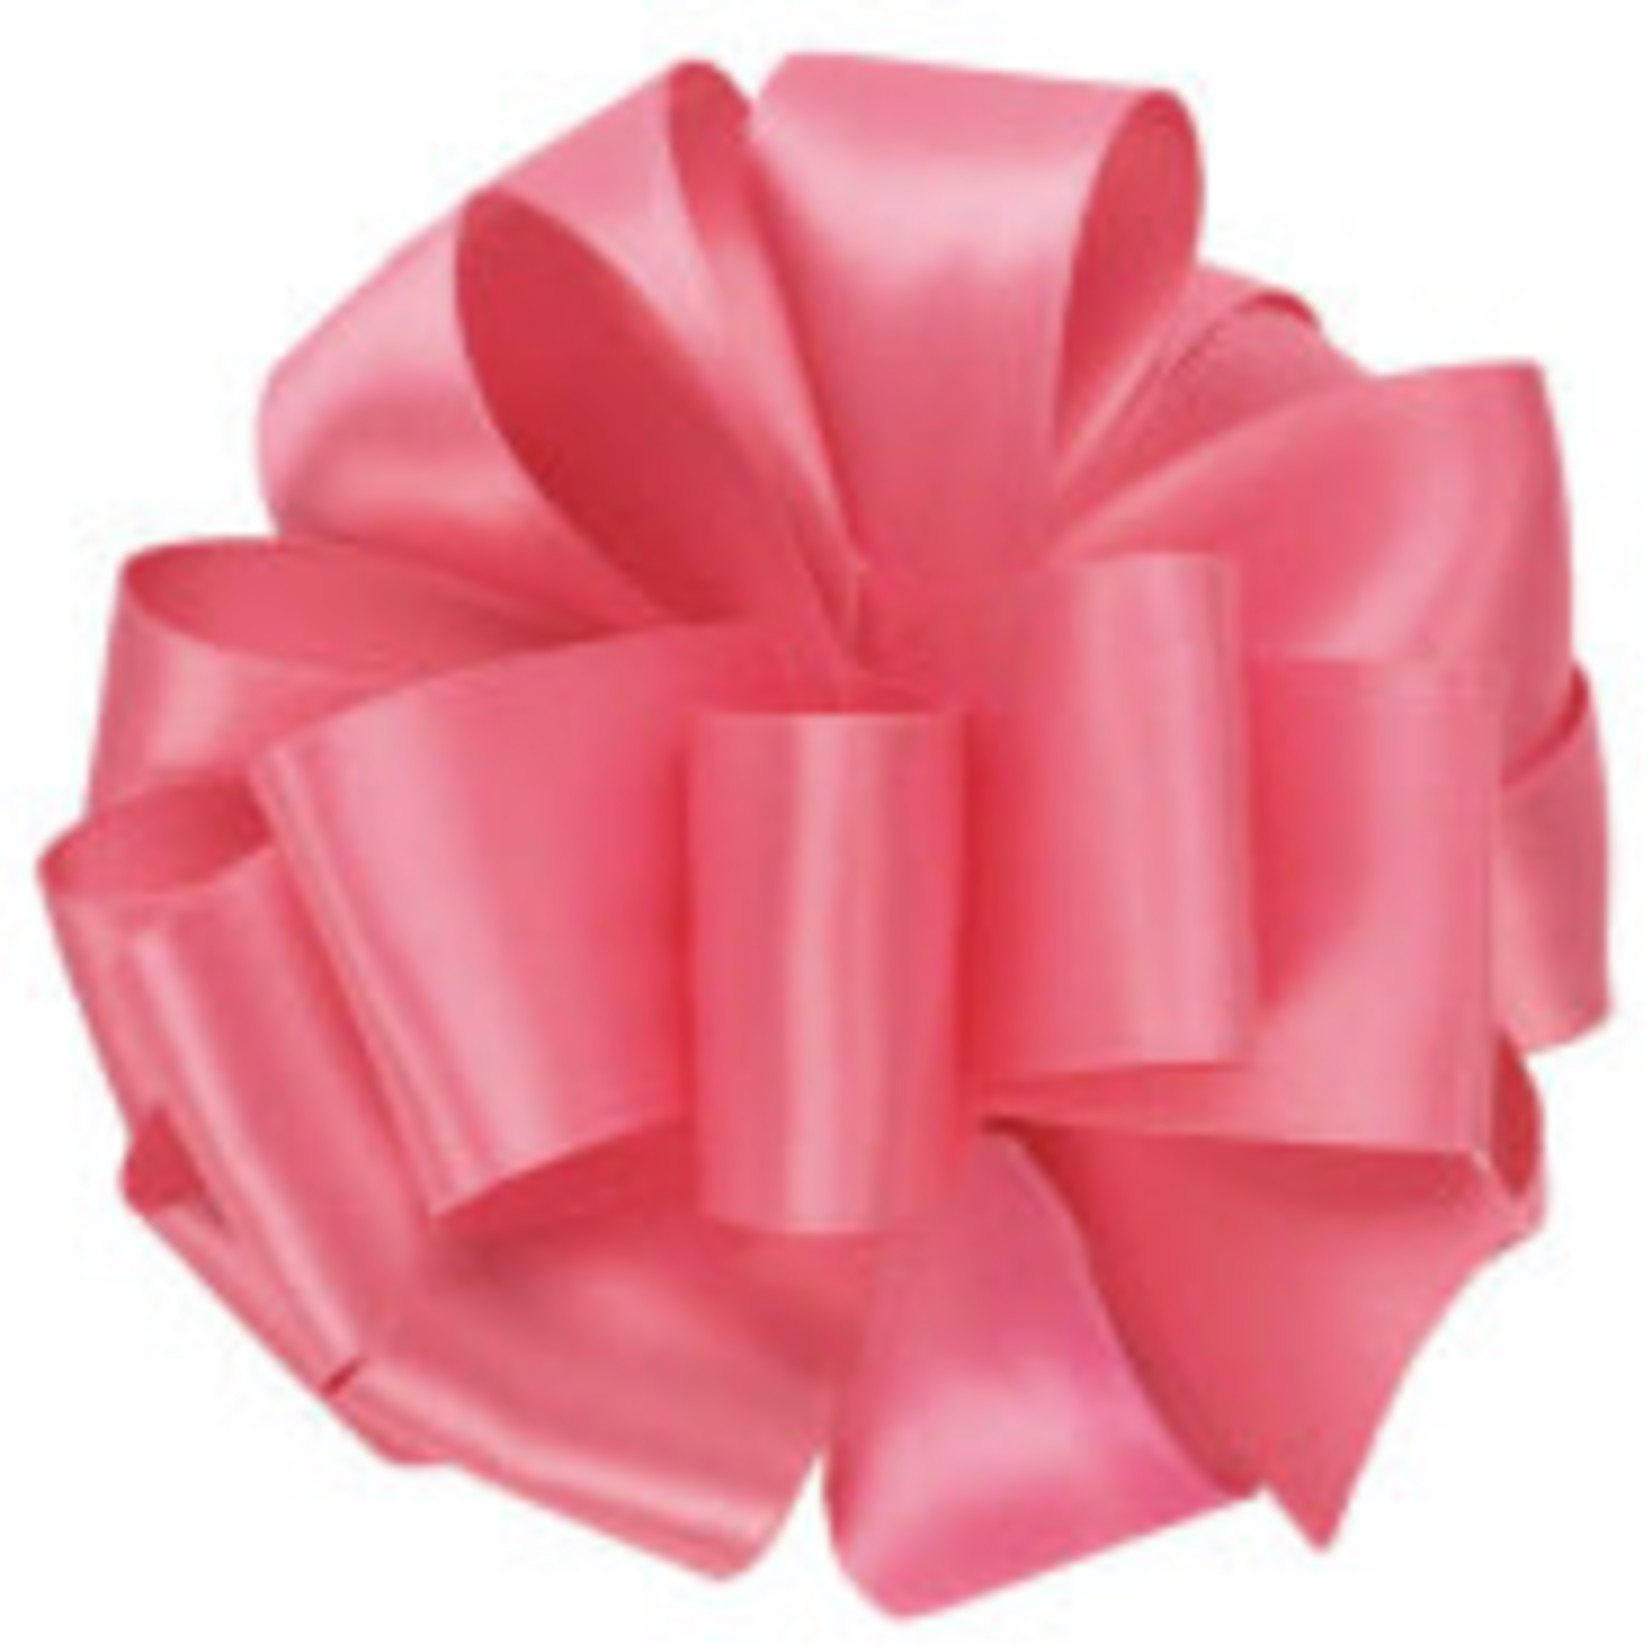 #9, 50 YD DOUBLE FACE SATIN RIBBON HOT PINK